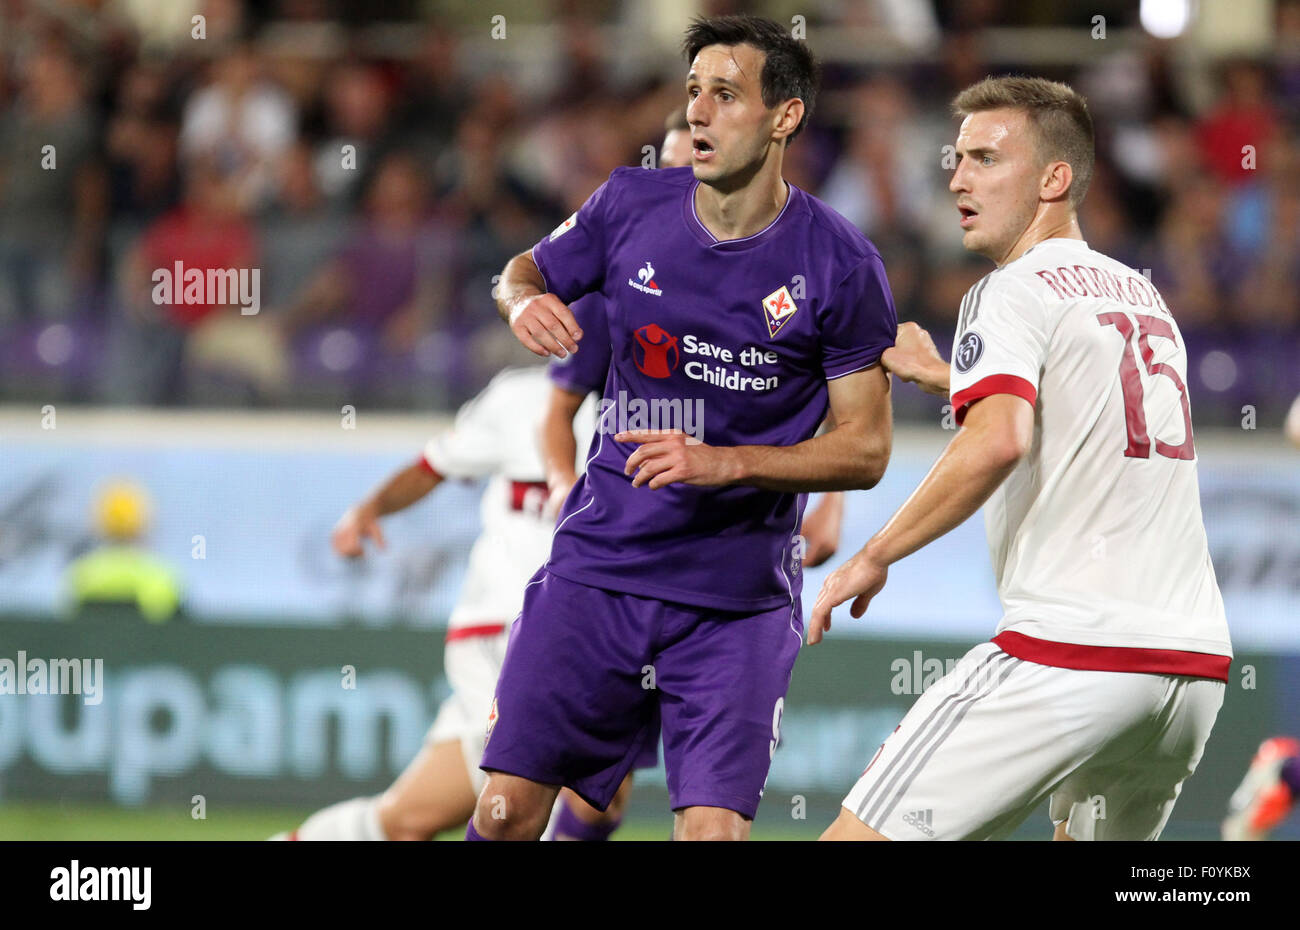 Florence, Italy, 23rd Aug, 2015. Fiorentina's forward Nikola Kalinic and  Milan's defender Rodrigo Ely (R) during the Italian Serie A football match  between ACF Fiorentina v AC Milan on 23th August, 2015